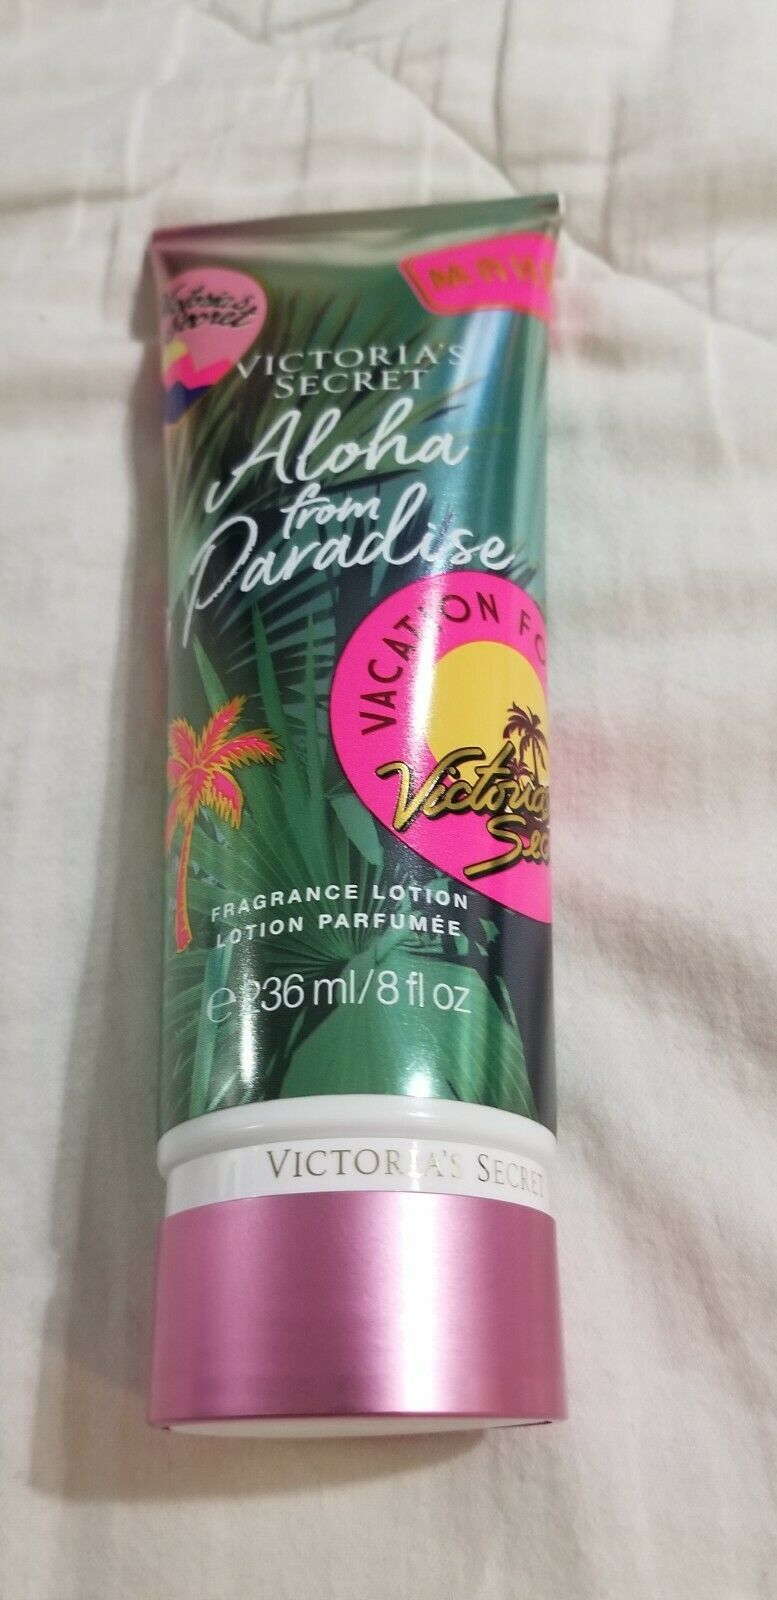 Primary image for VICTORIA'S SECRET ALOHA FROM PARADISE BODY LOTION 8.0 FL OZ